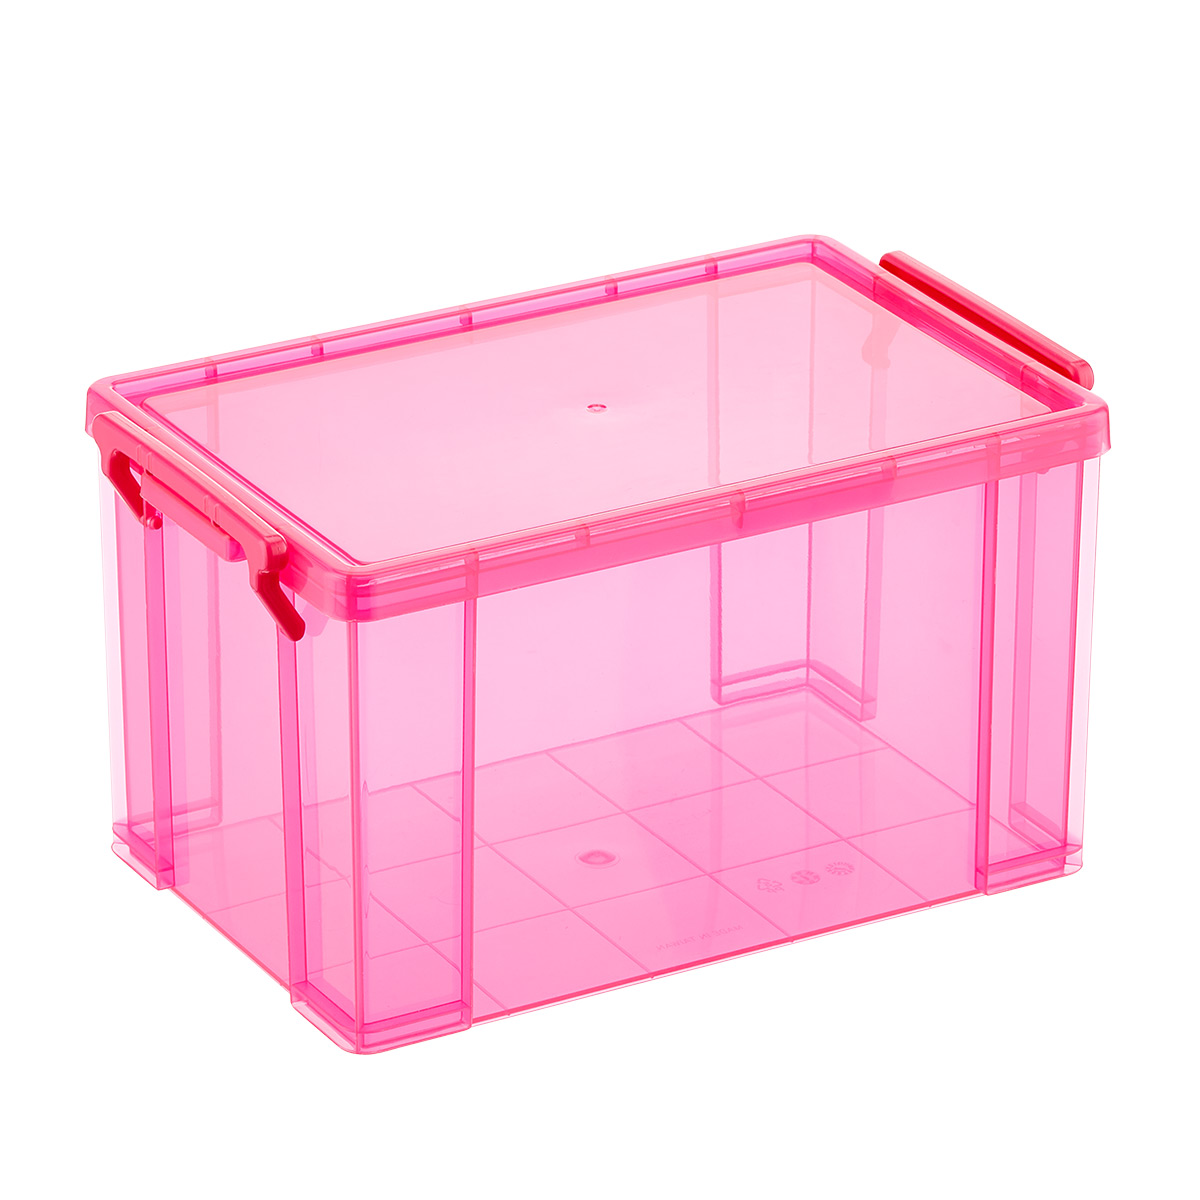 https://images.containerstore.com/catalogimages/365132/10078041-latch-box-fuchsia-extra-lar.jpg